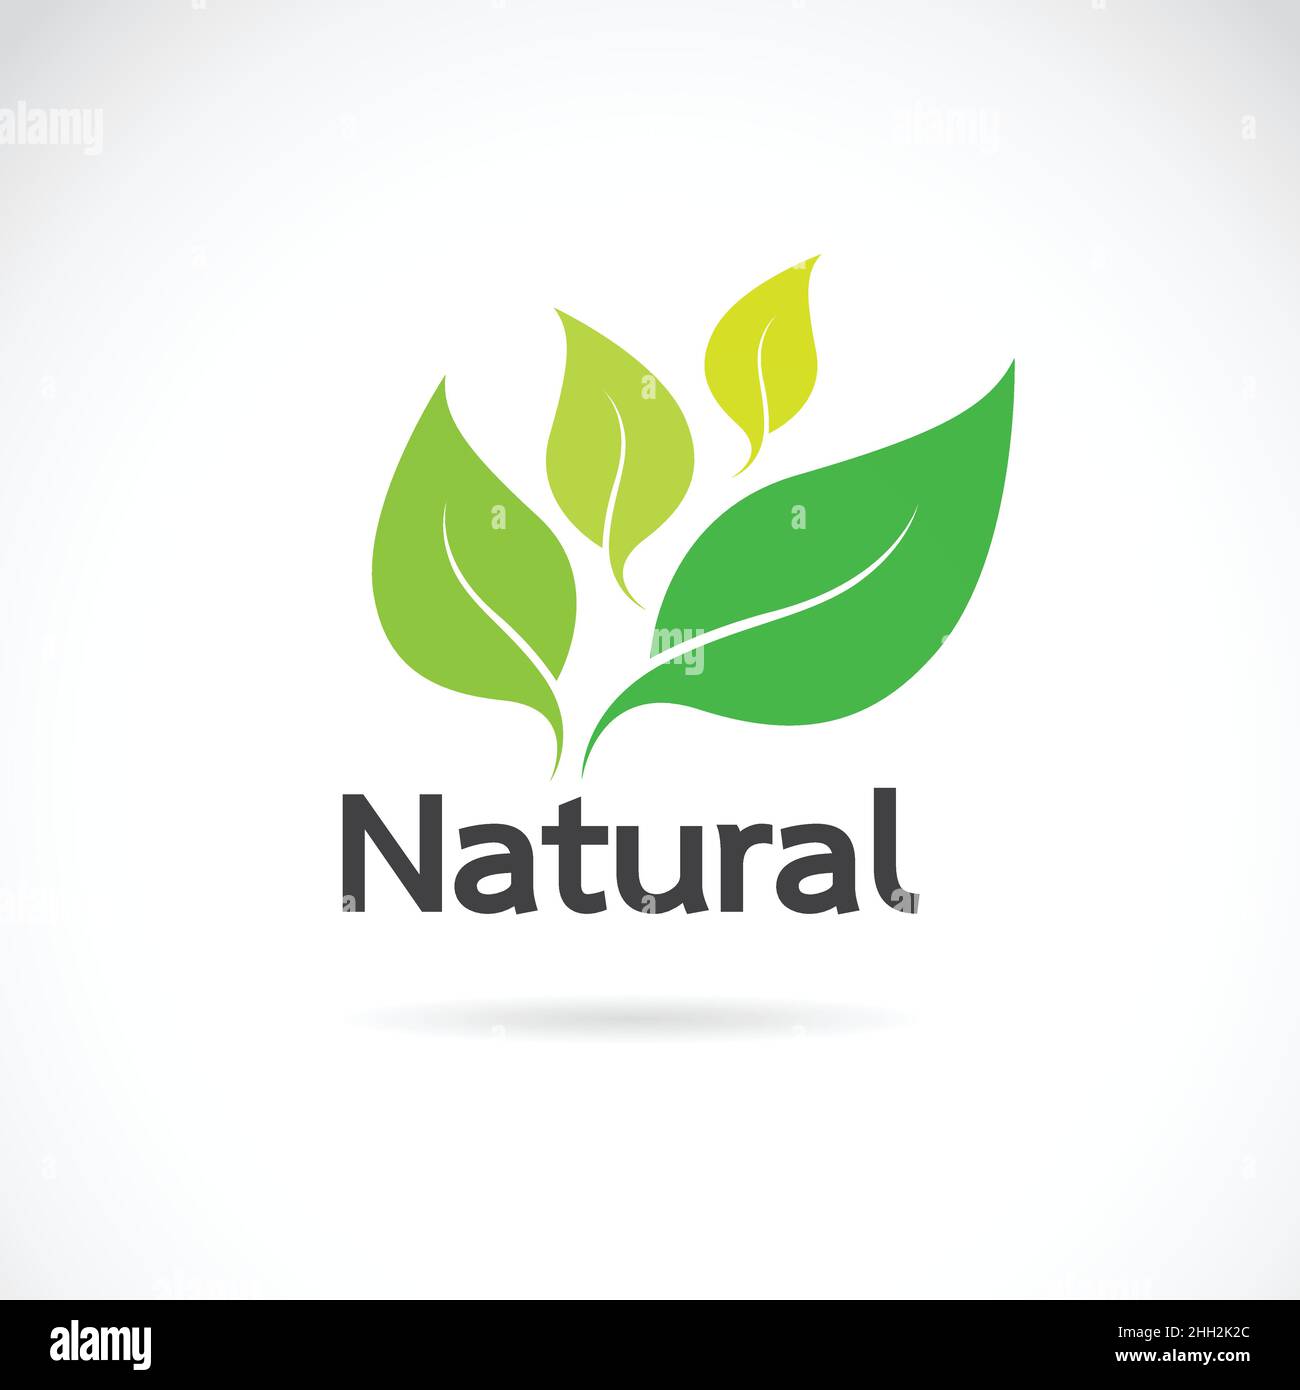 Natural logo design vector template on white background. Leaf icon Stock Vector